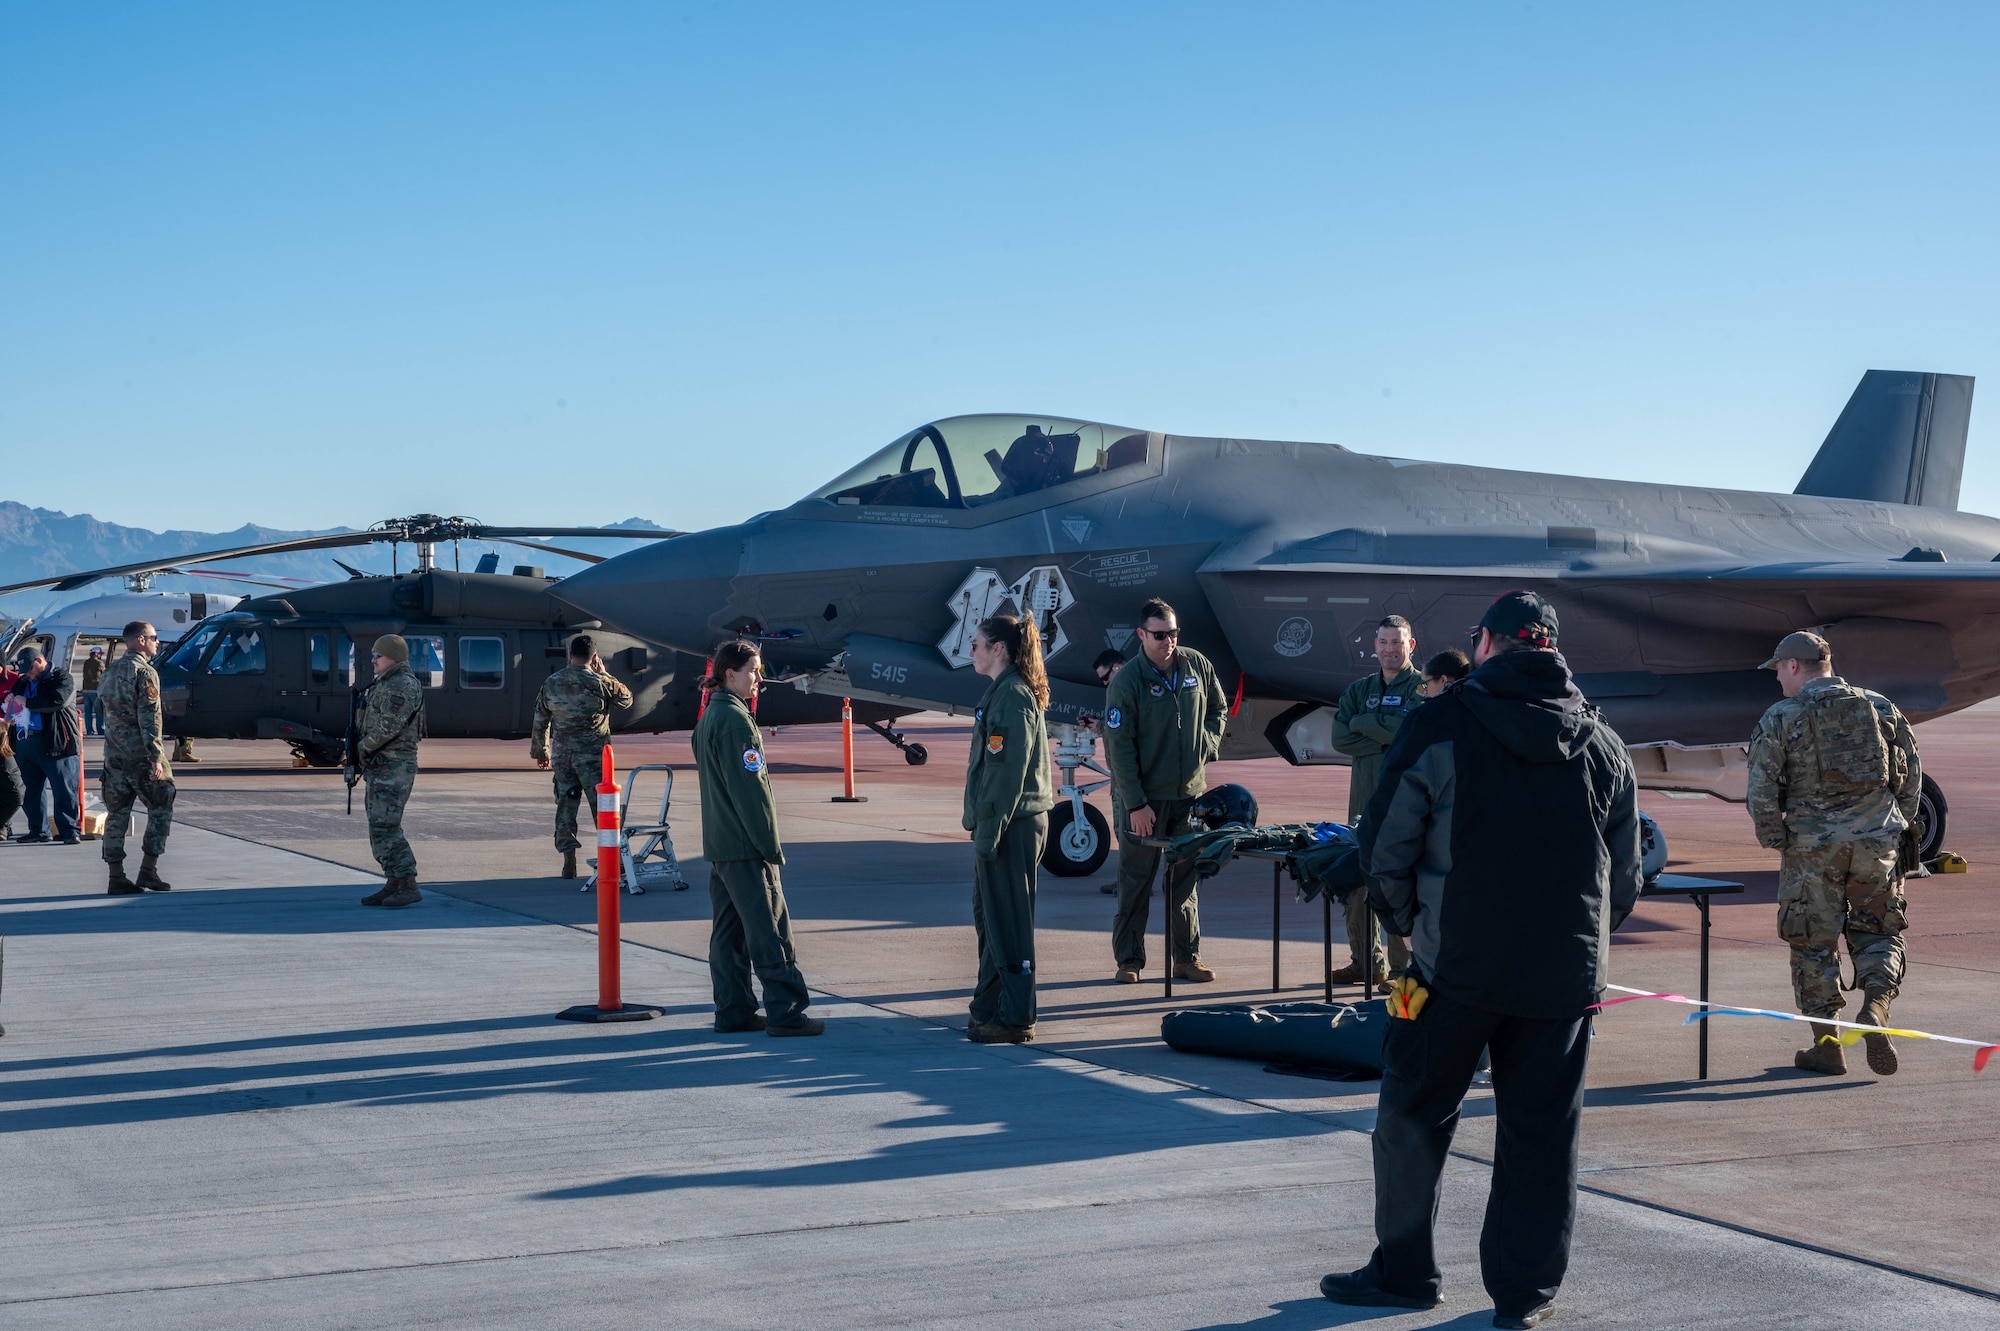 Airmen assigned to the 56th Fighter Wing at Luke Air Force Base, Arizona, showcase an F-35 Lightning II aircraft during the Mesa Gateway Aviation Day, Jan. 24, 2023, in Mesa, Arizona.